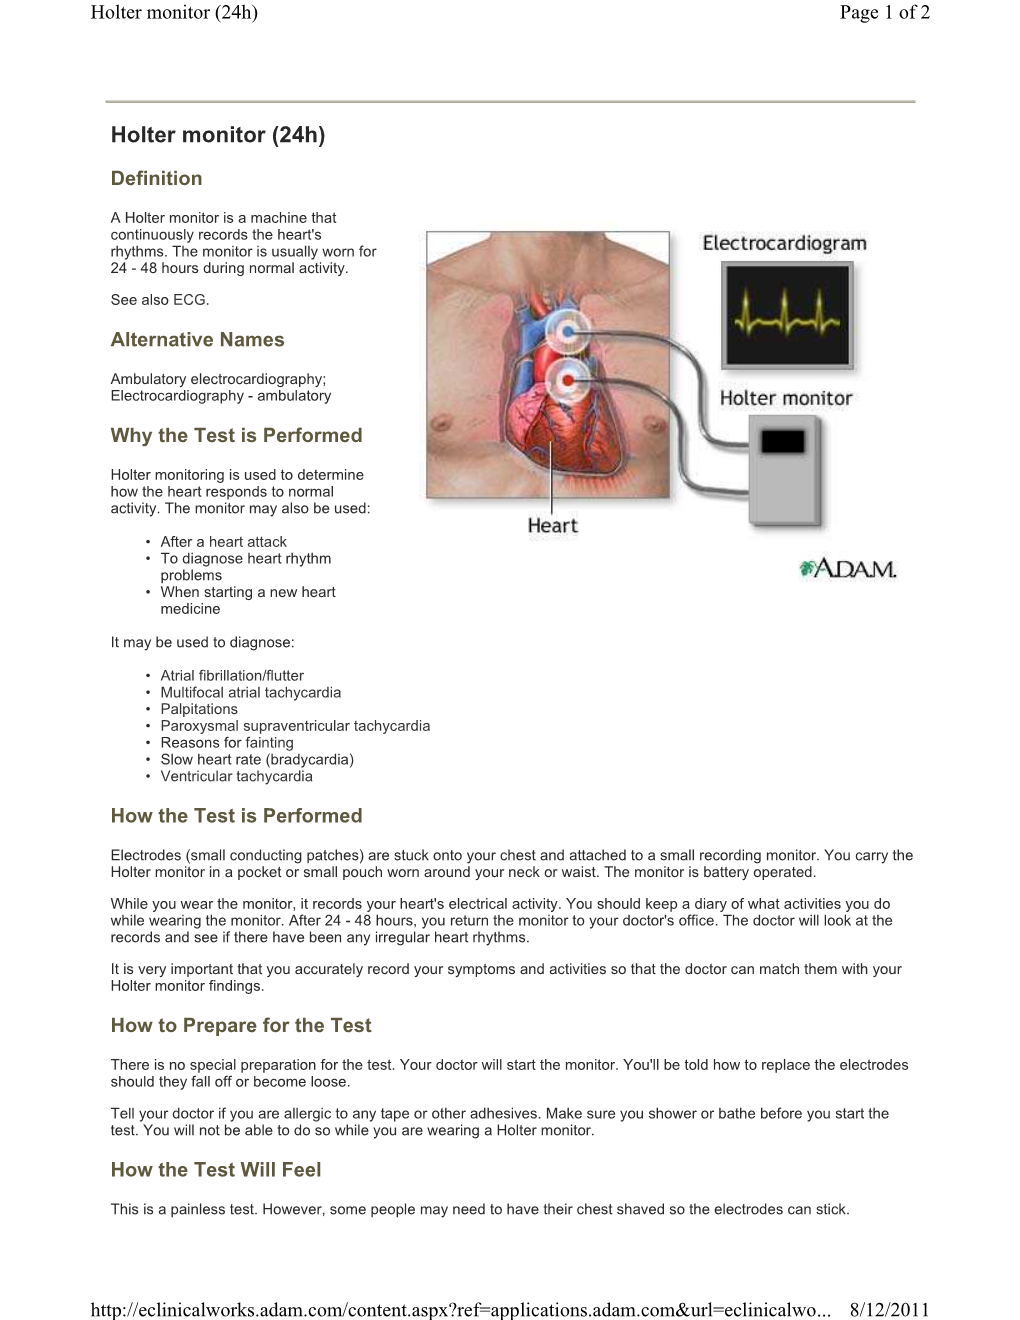 Holter Monitor (24H) Page 1 of 2